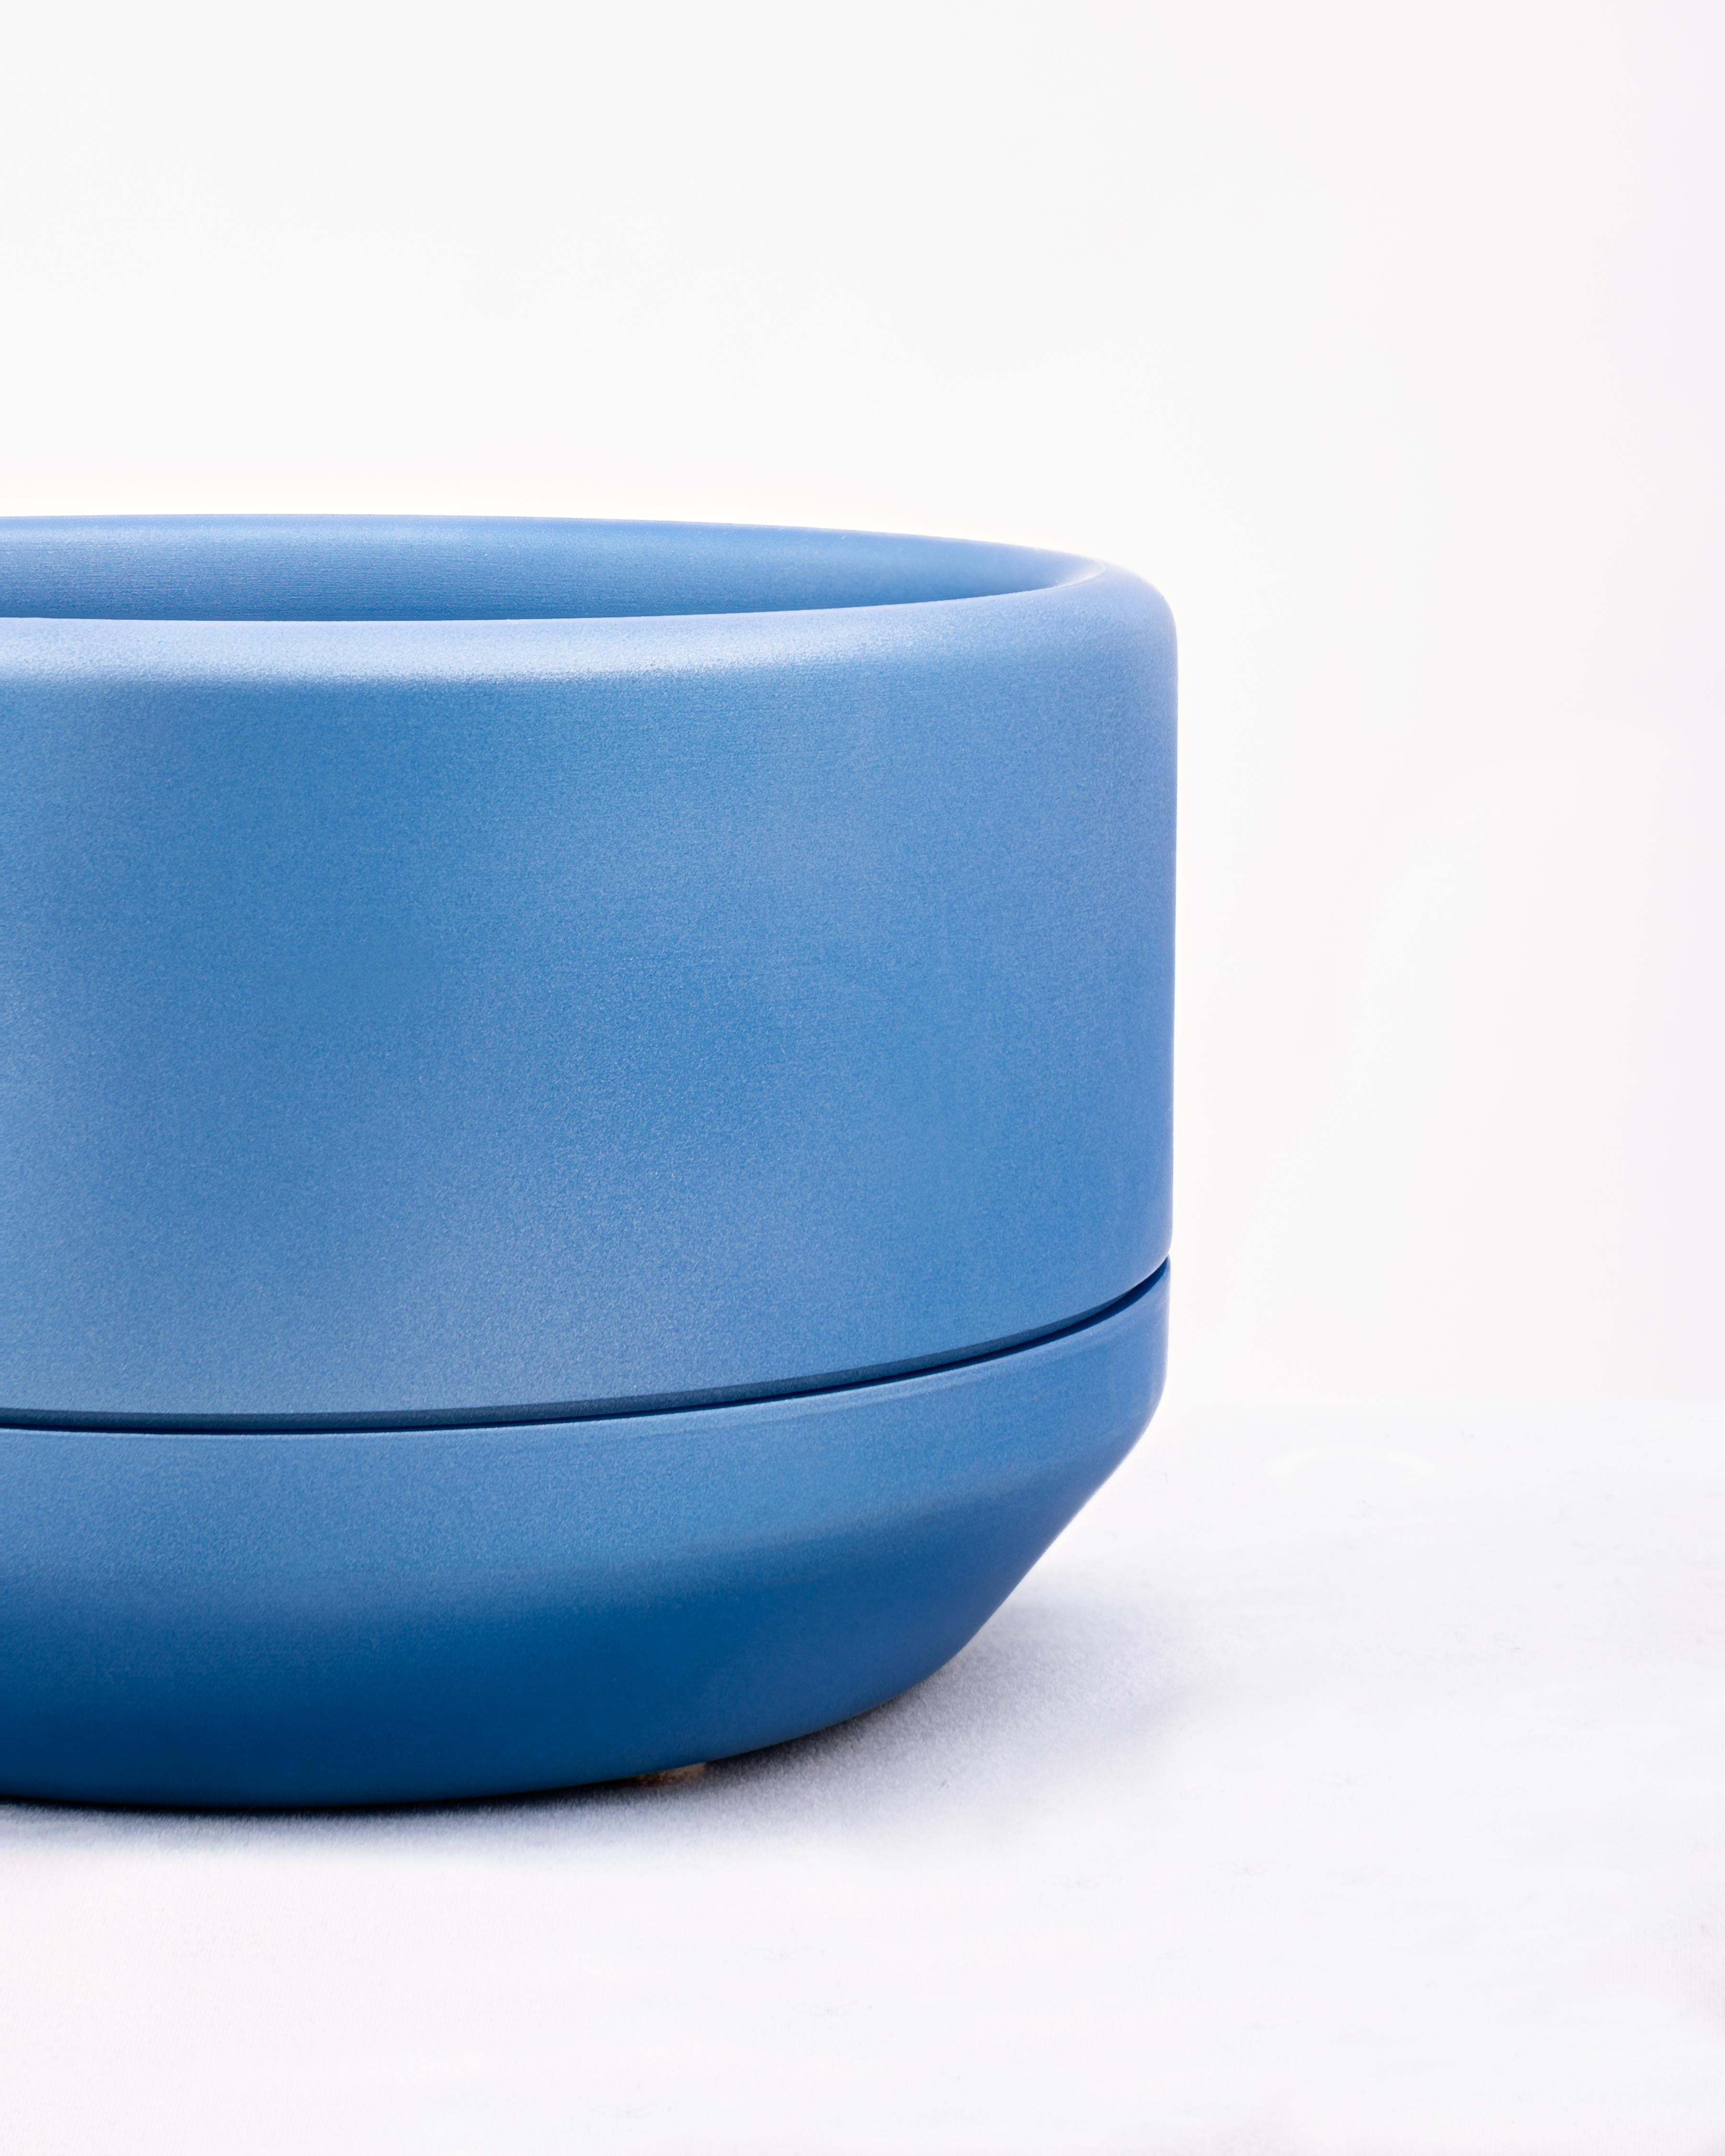 CNC milled and spun aluminum planter with blue ceramic coat finish. The main body of the planter is set on a loose spun aluminum drainage base. Interior dimensions are 5.5 inches diameter, and 2.75